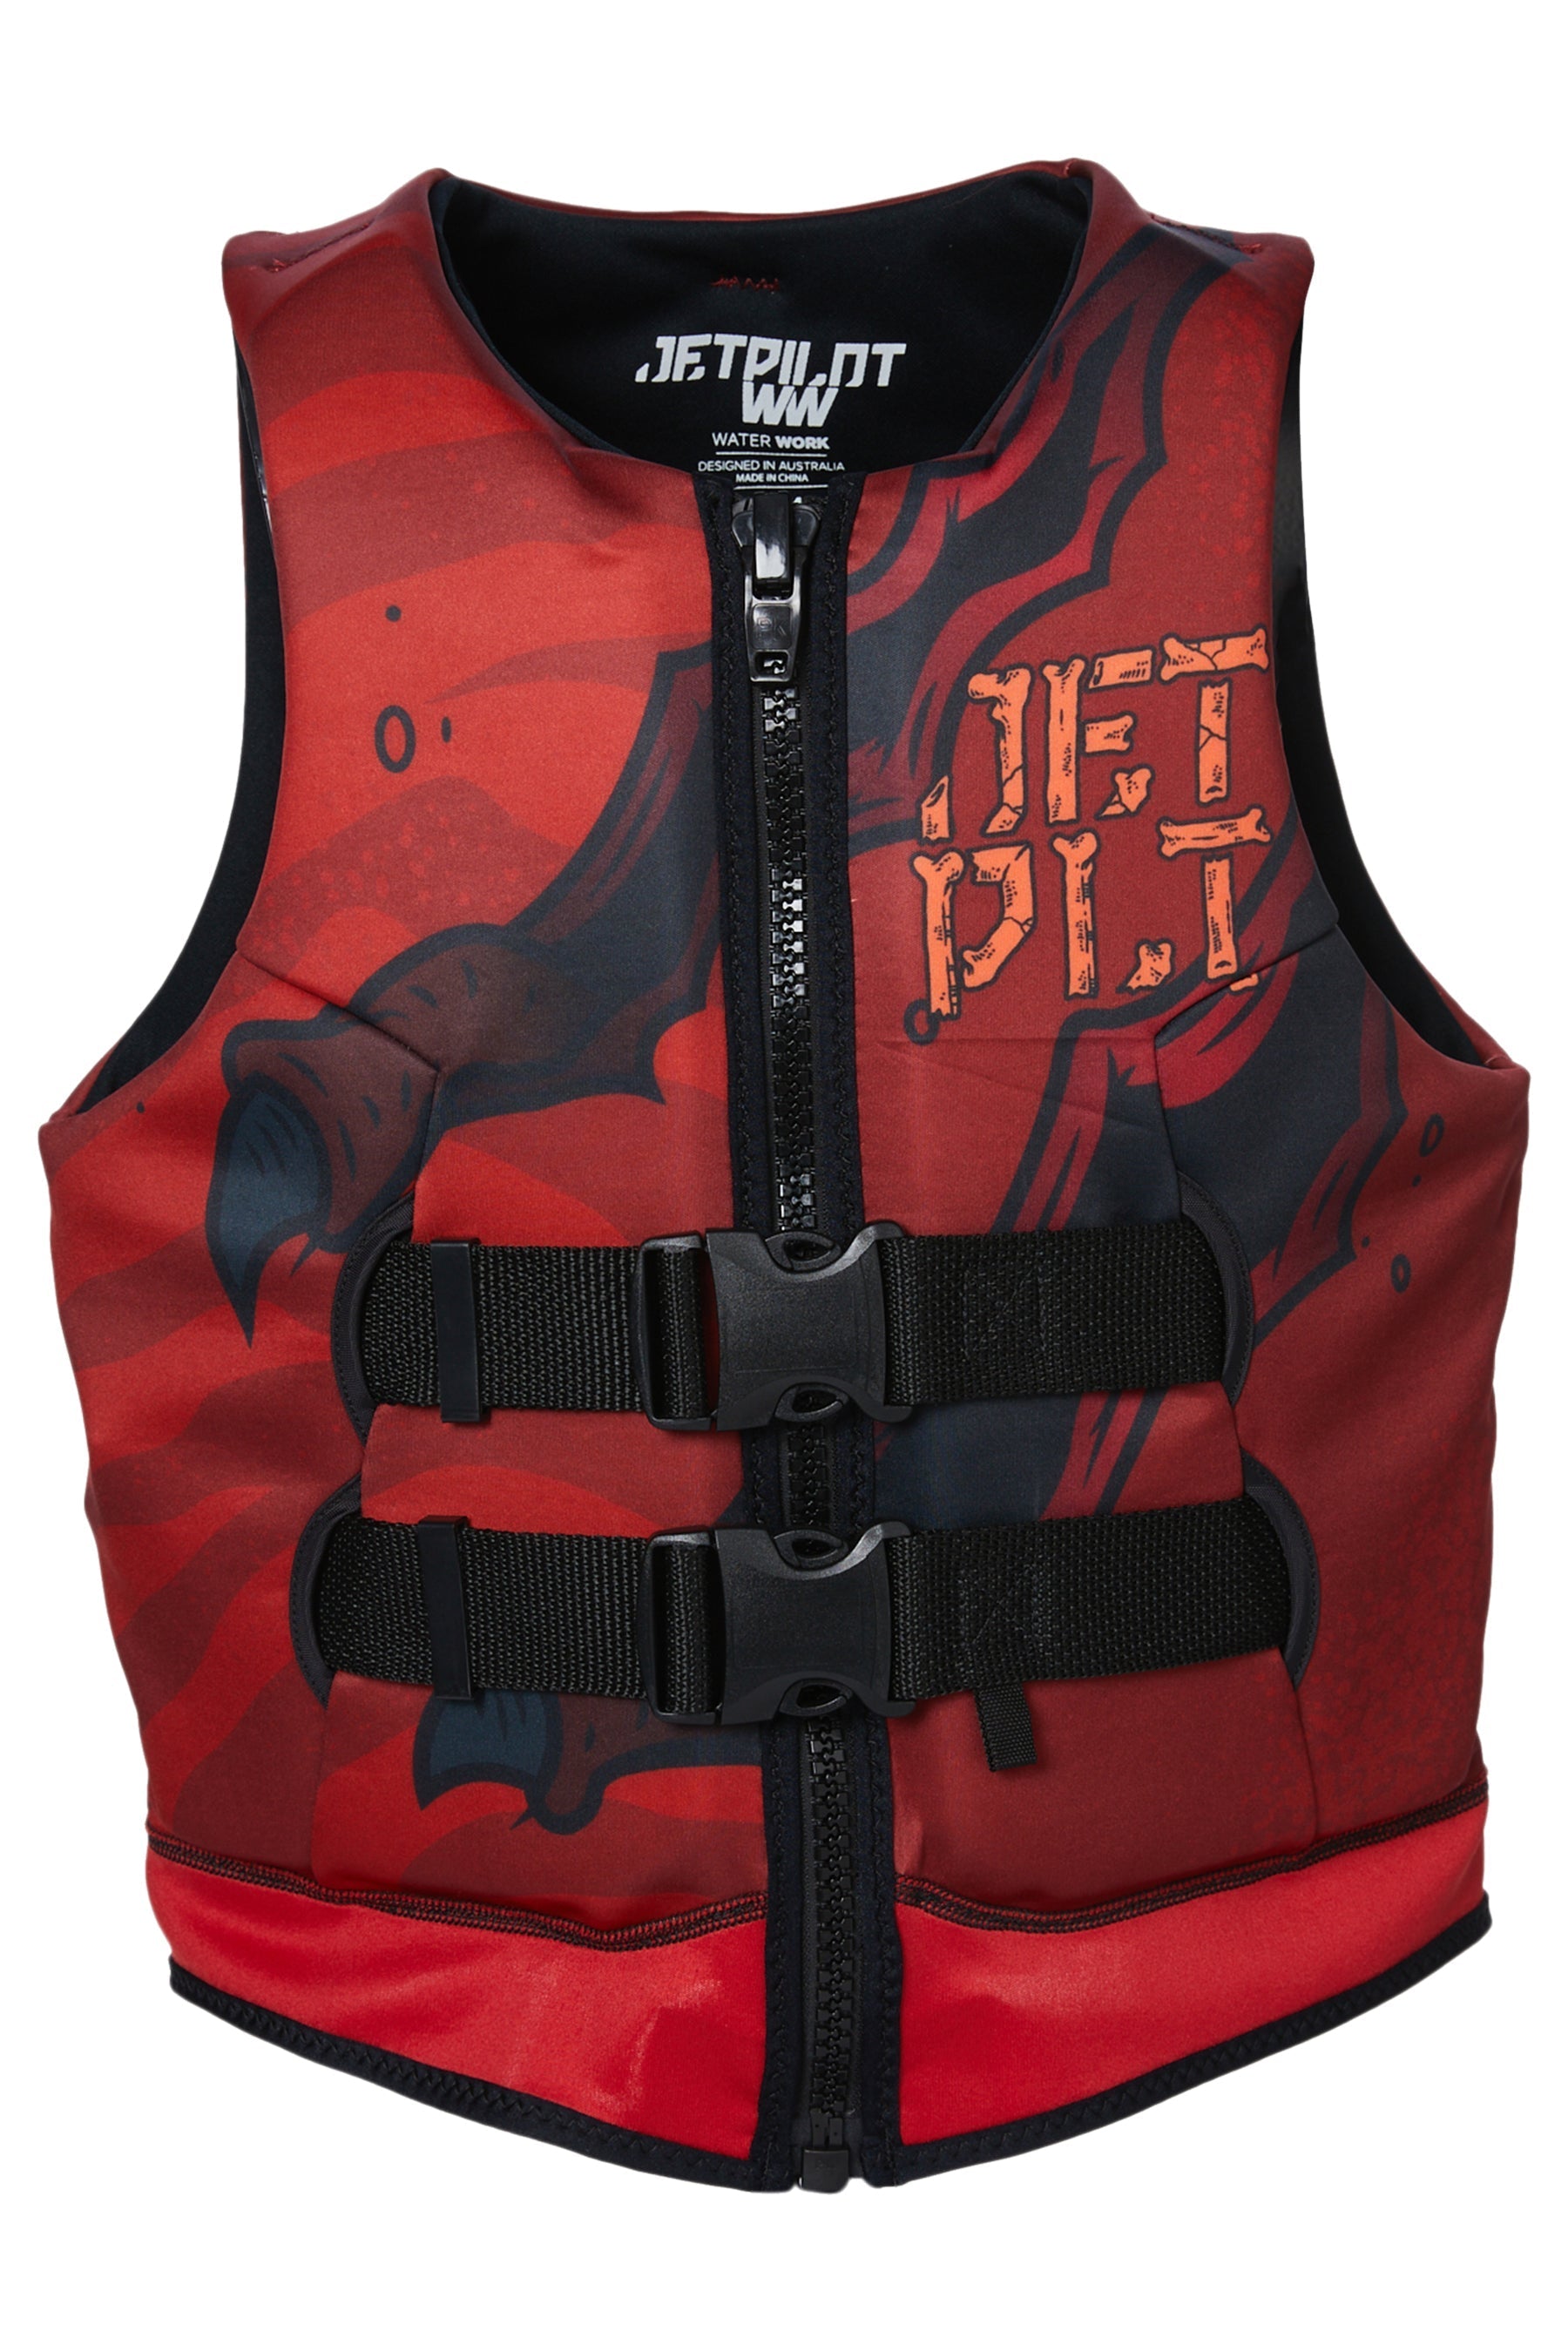 Jetpilot Boys Rex Youth Cause Neo Life Jacket Red